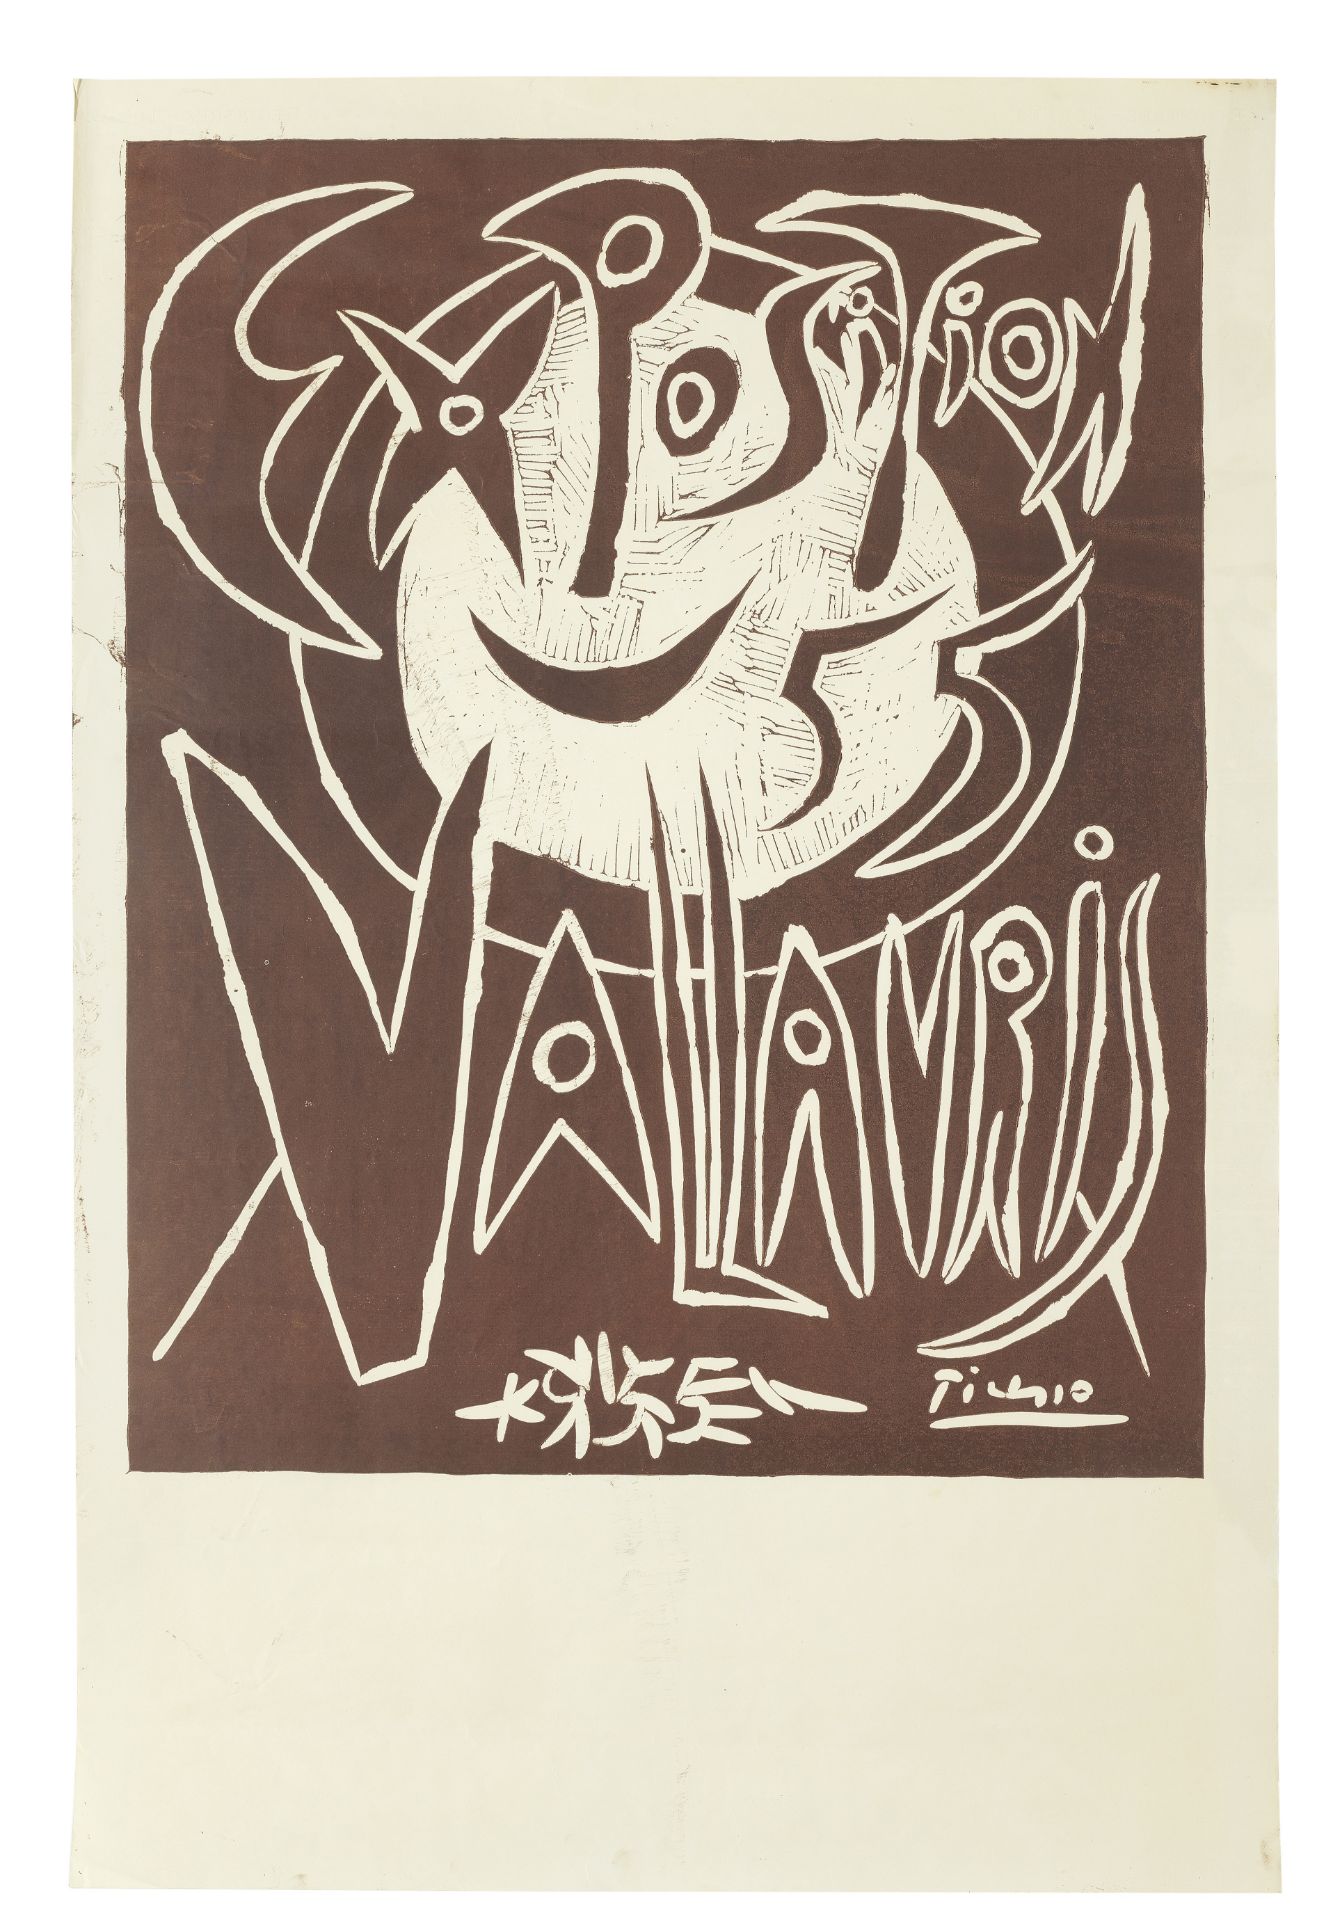 Pablo Picasso (1881-1973) Exposition 55 Vallauris, 1955 (This work is from the edition of 600, pr...